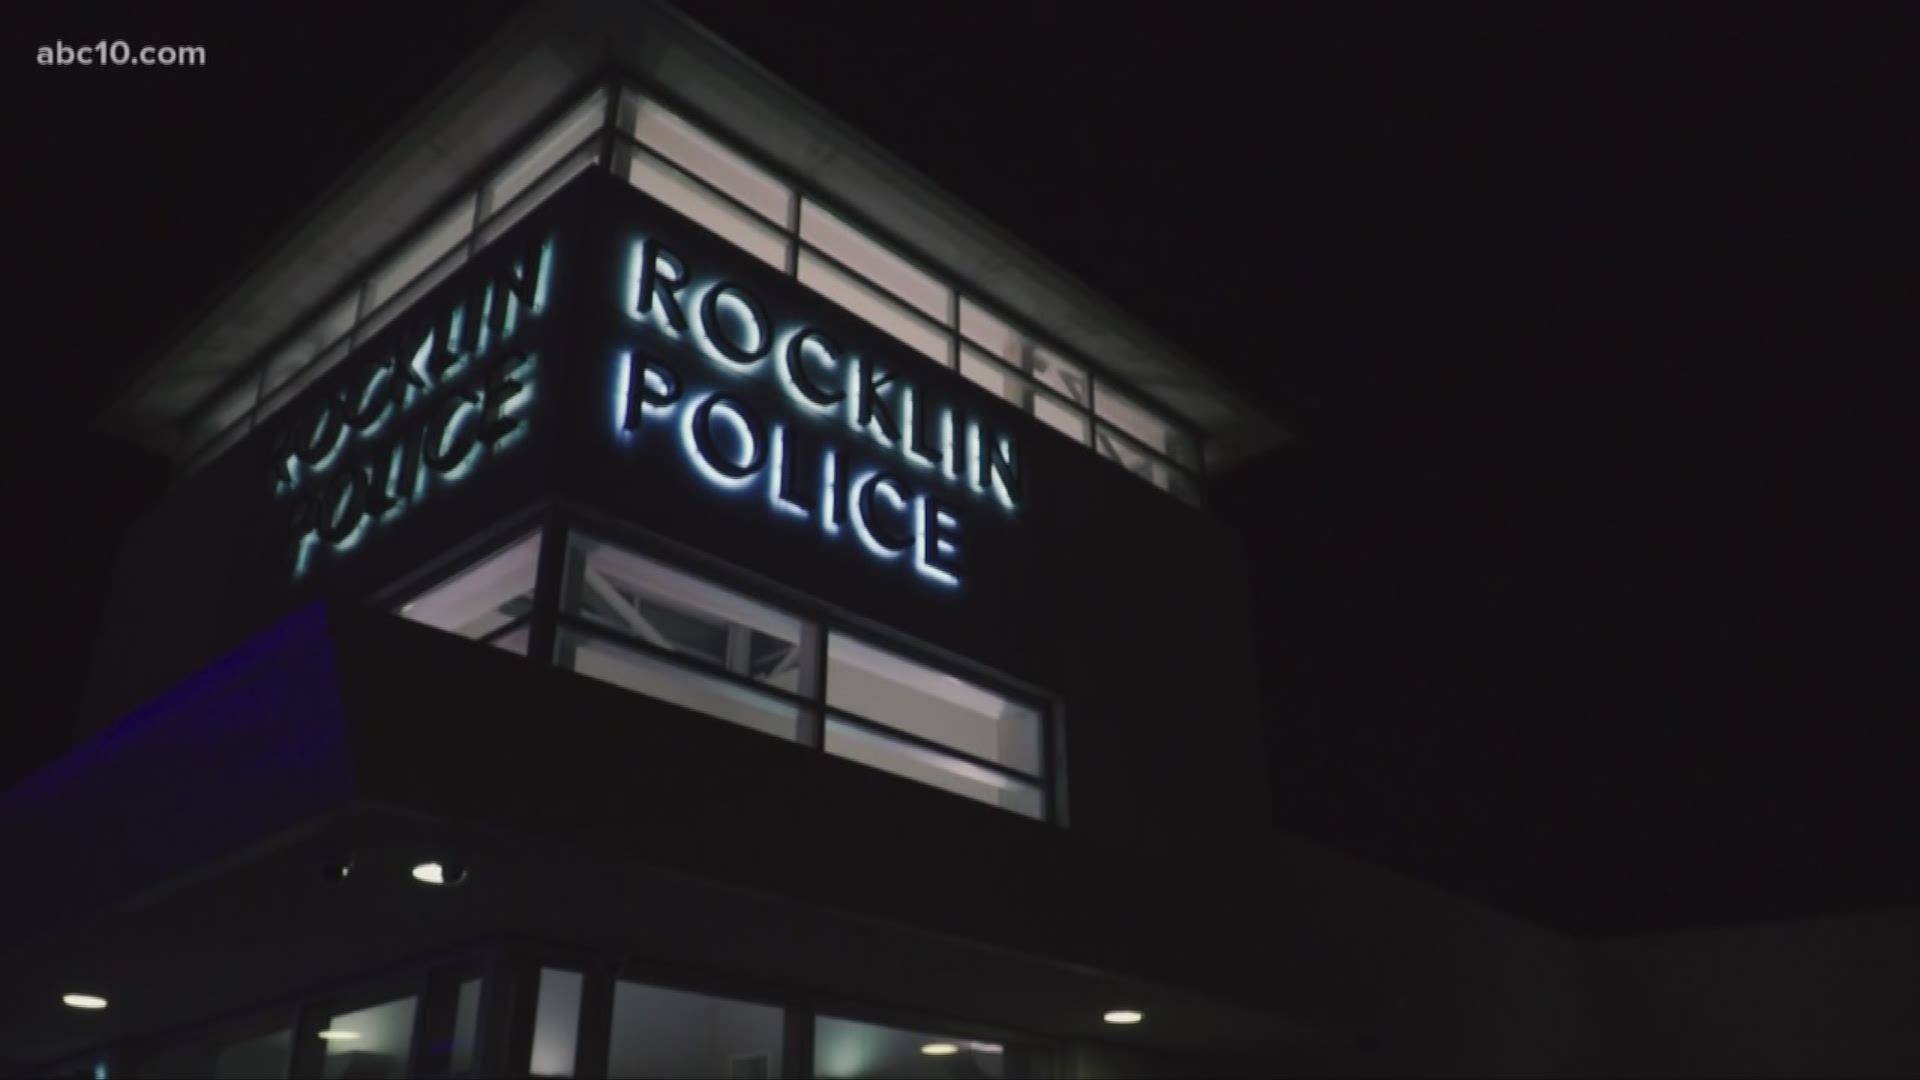 Rocklin Police are sounding the alarm about human trafficking in Placer County. Their aim isn't about a specific incident, but just to keep residents vigilant.